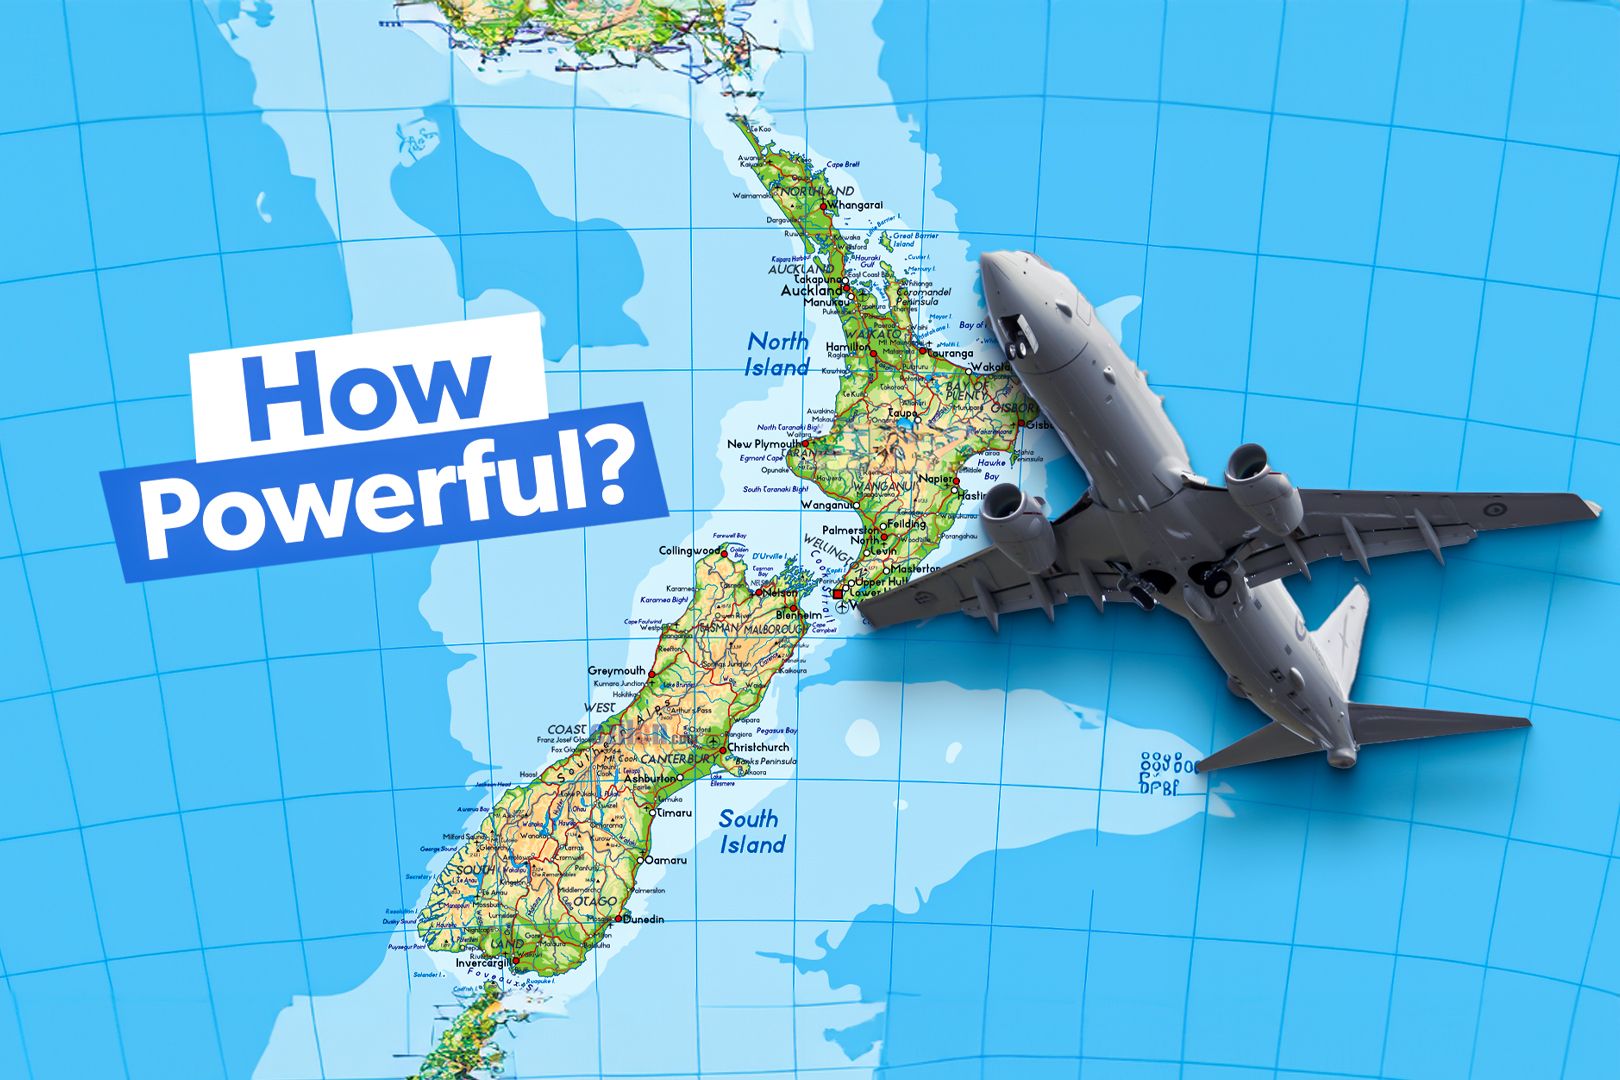 Map of New Zealand with NZRAF airplane